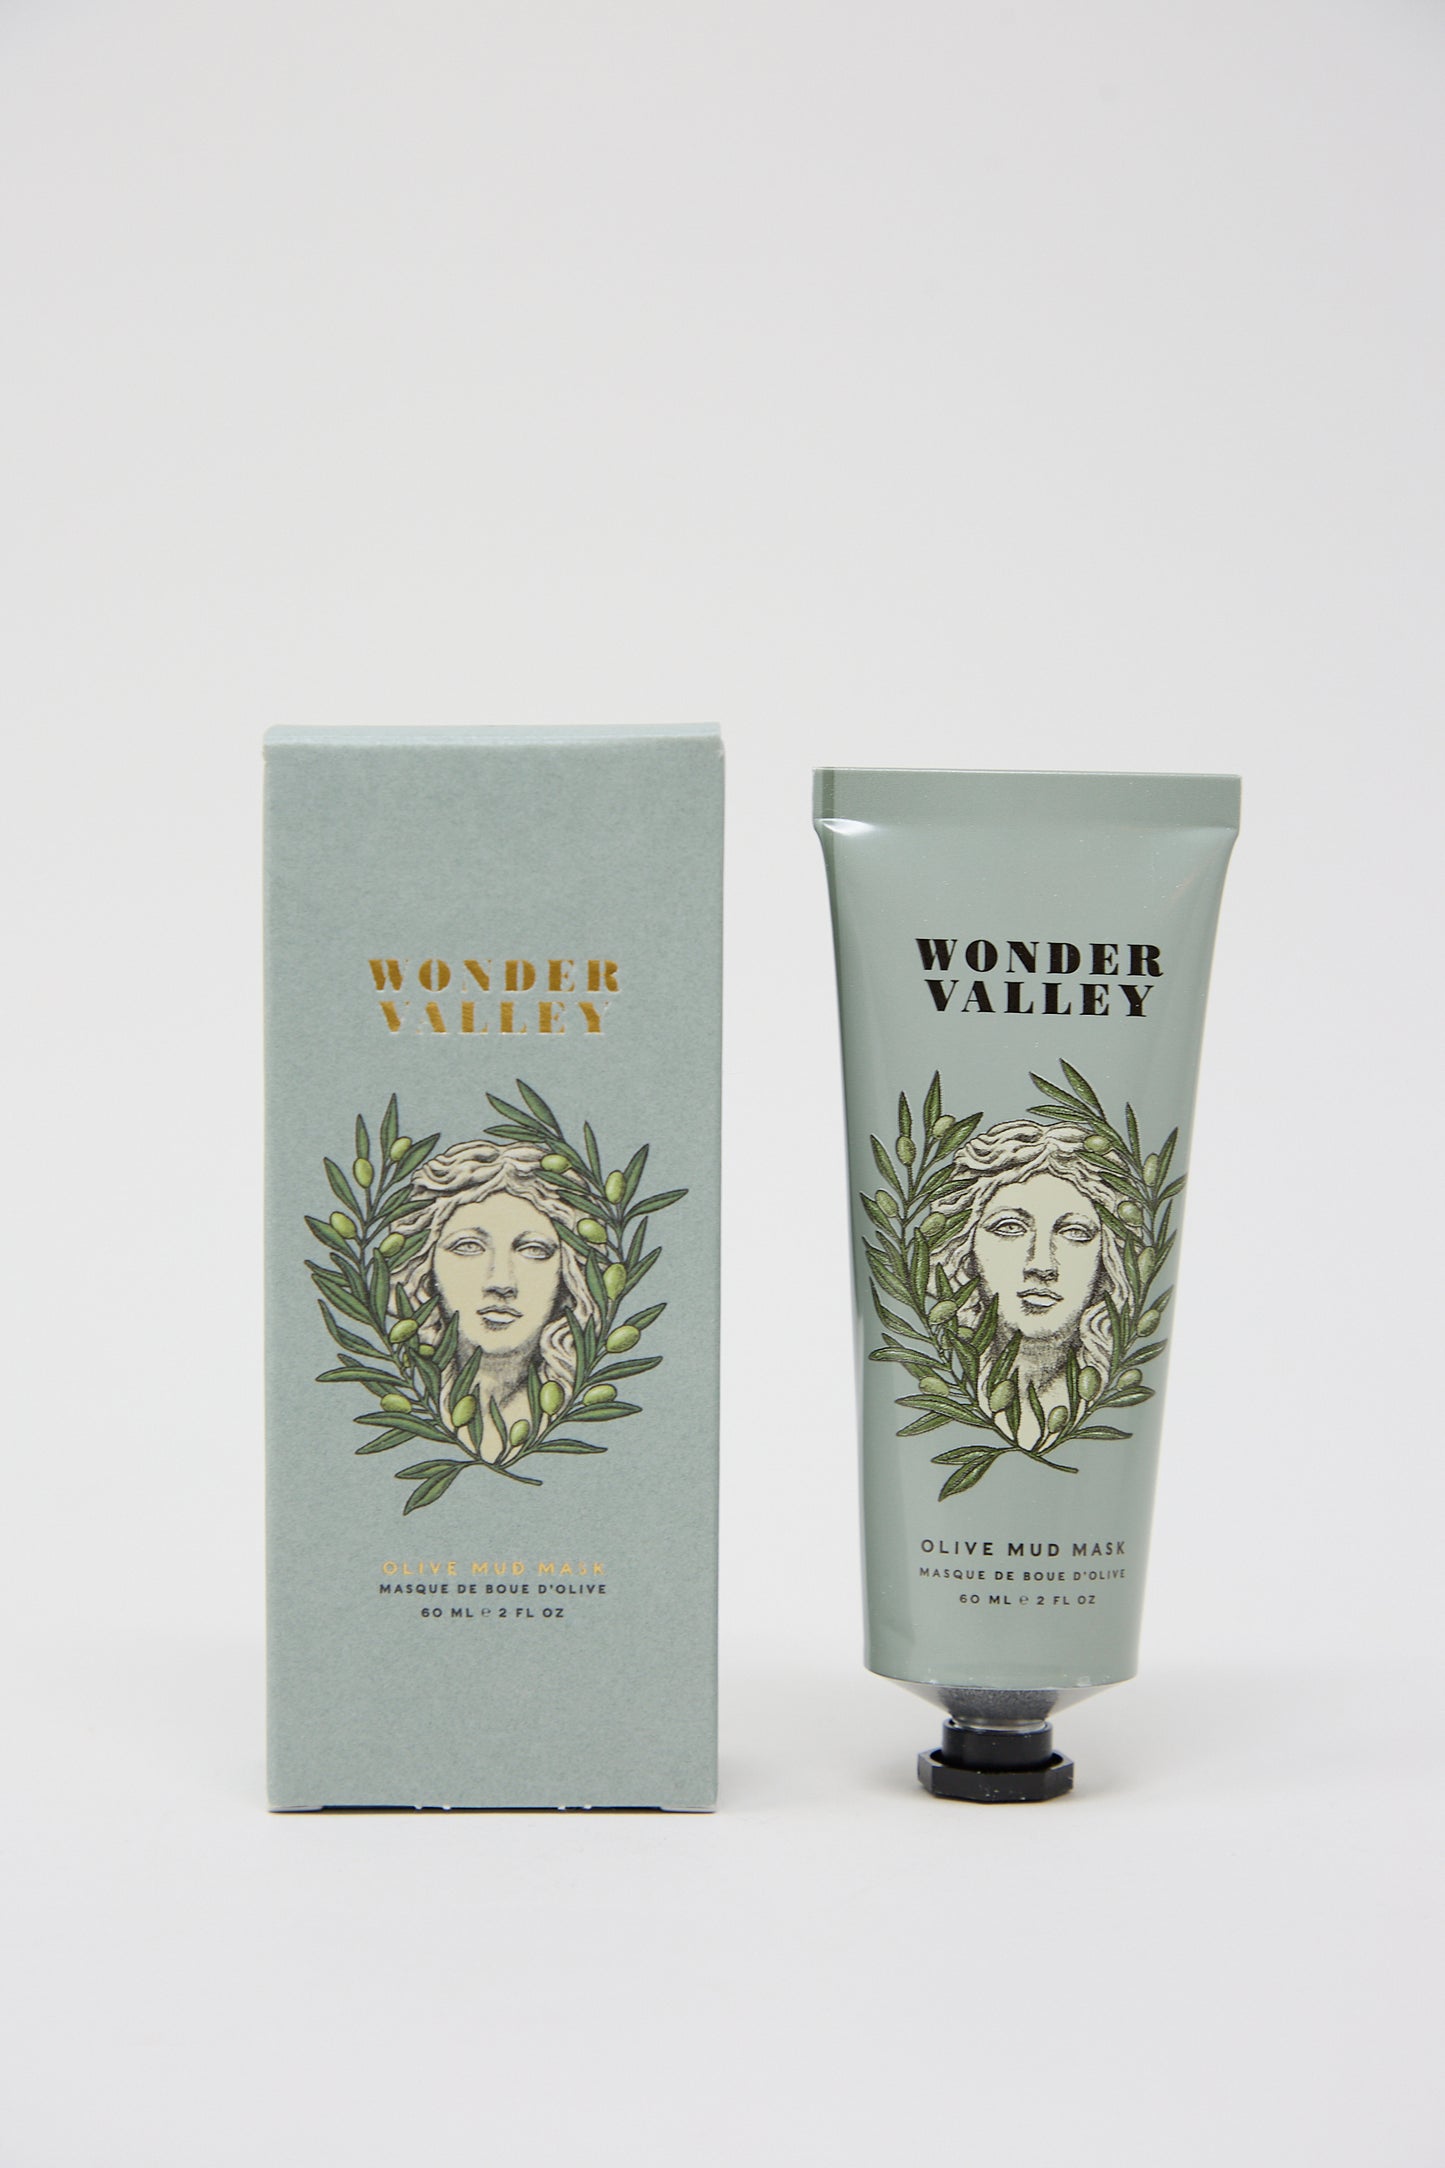 A tube of Wonder Valley Olive Mud Mask, which extracts impurities and prevents breakouts, next to its packaging, both featuring the same design of a woman's face surrounded by olive branches.